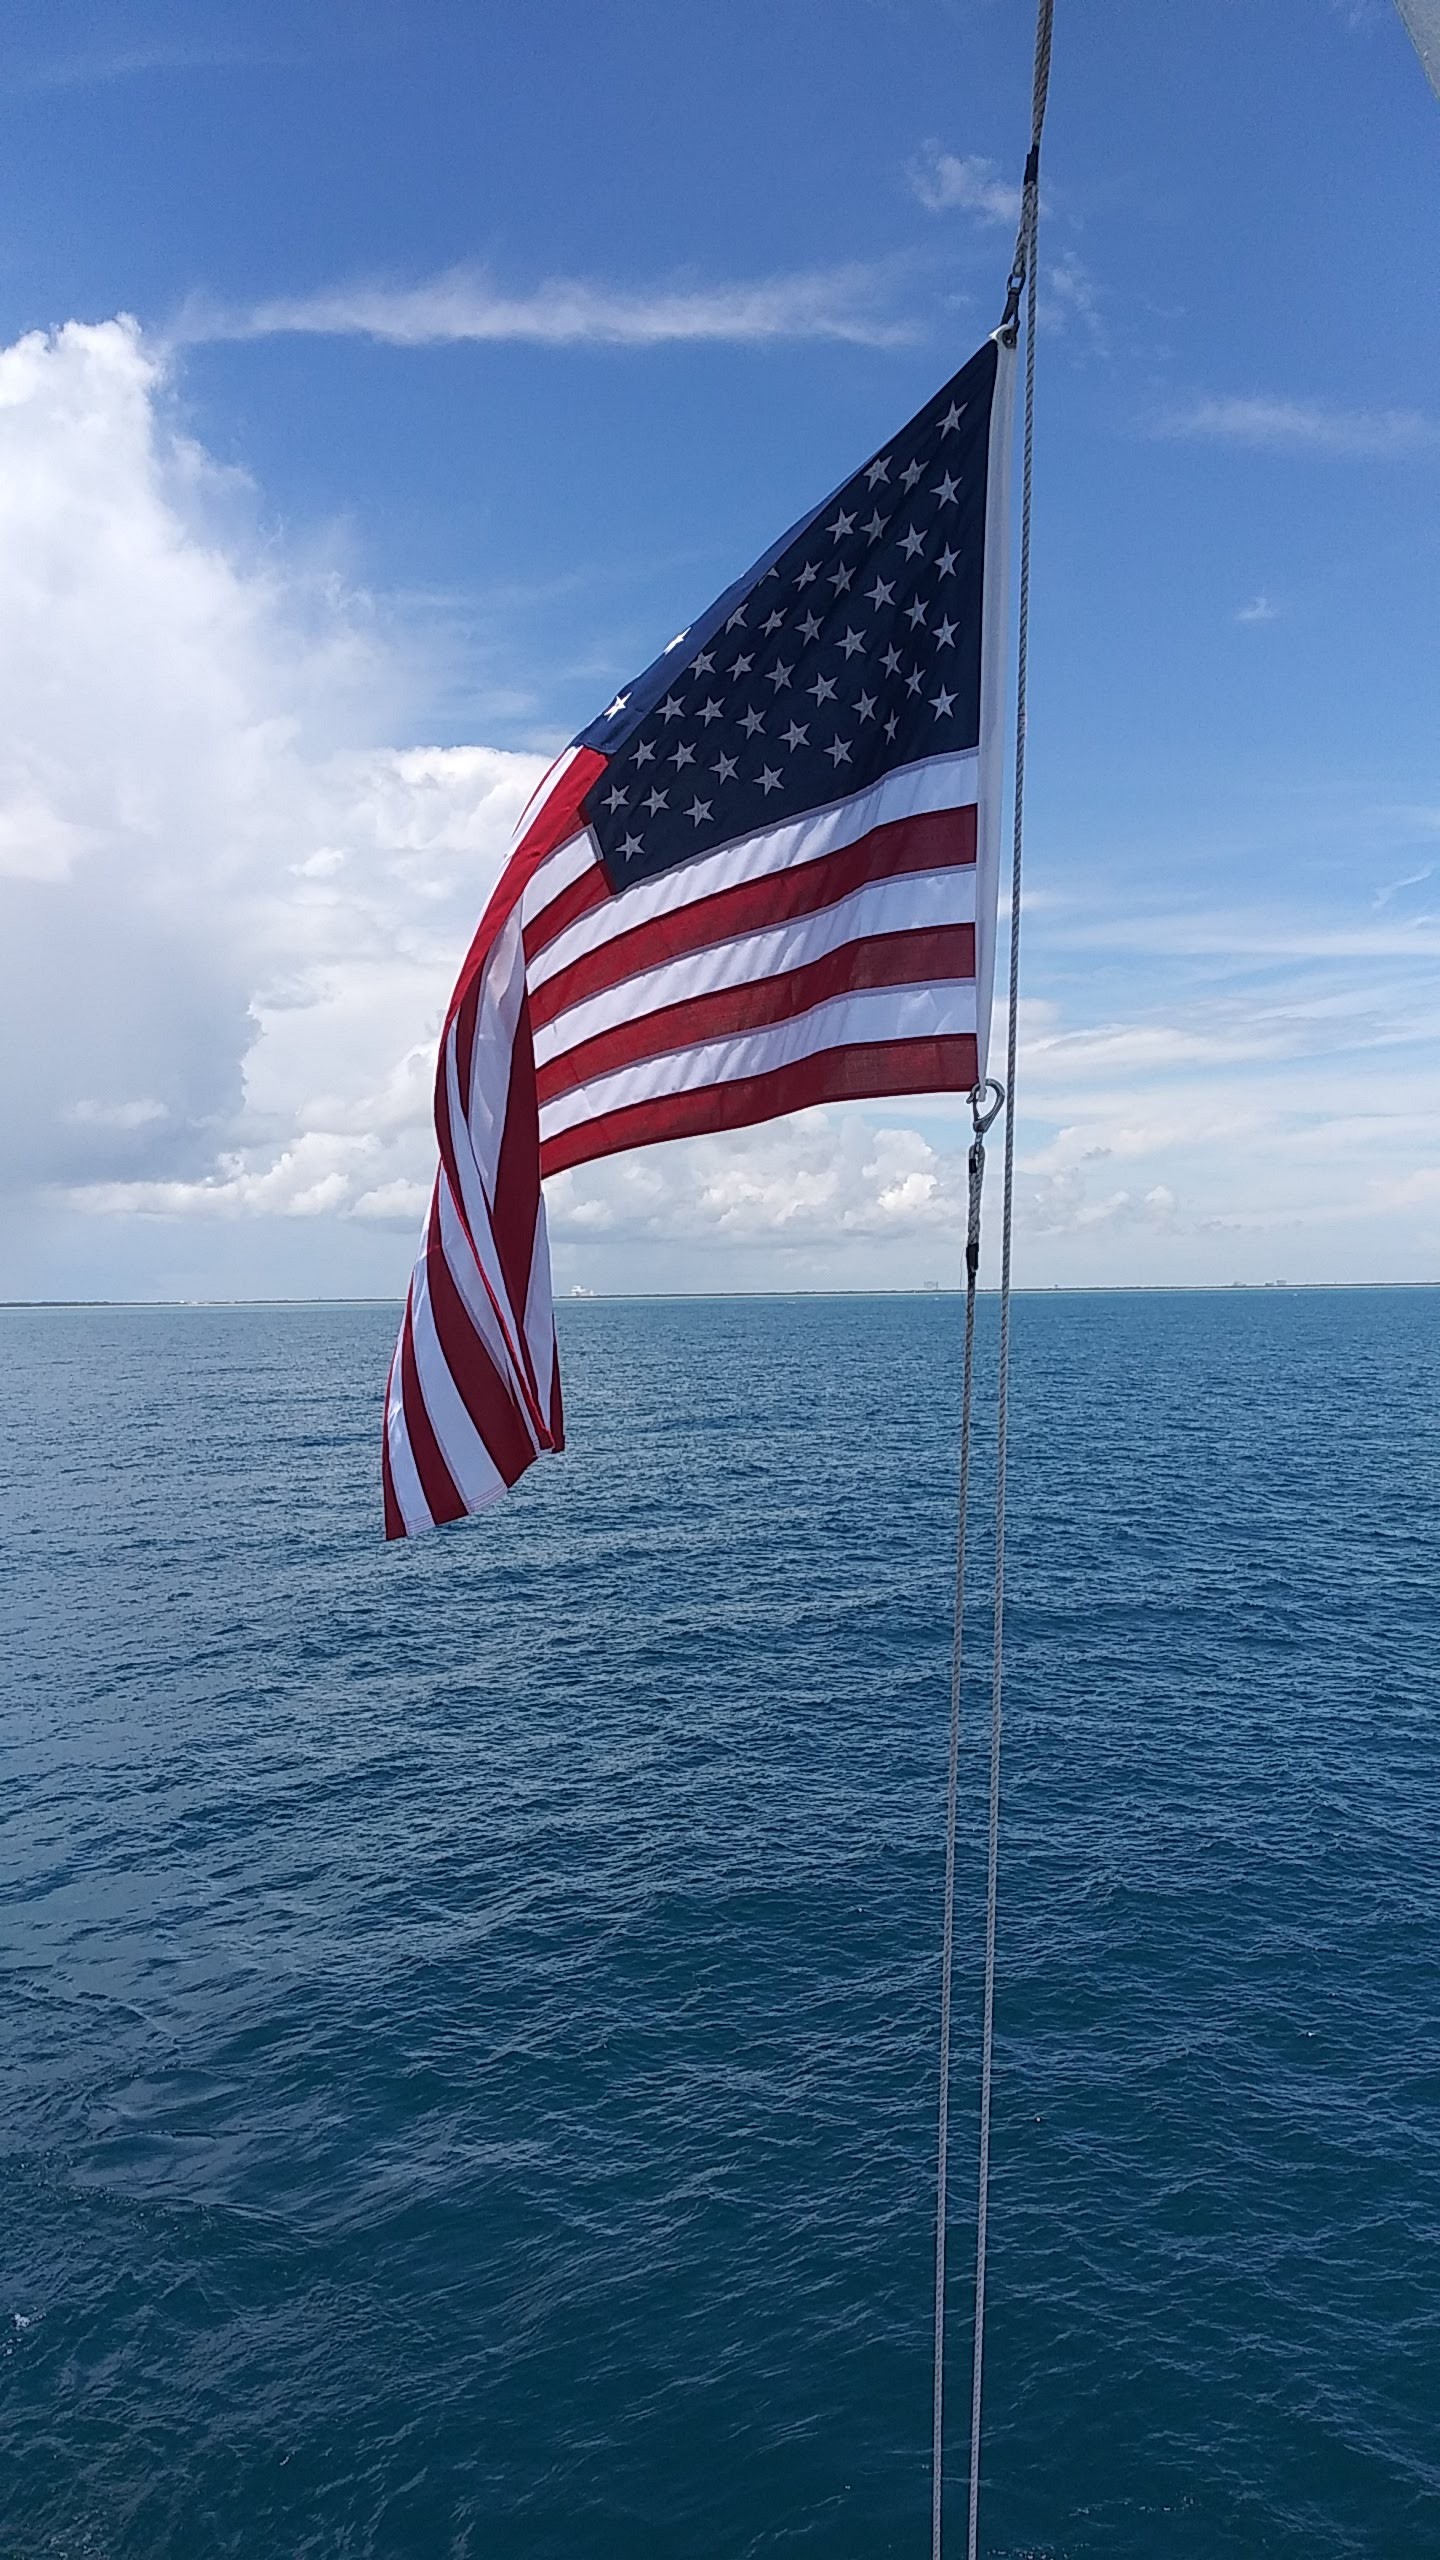 United States Flag on a boat 5